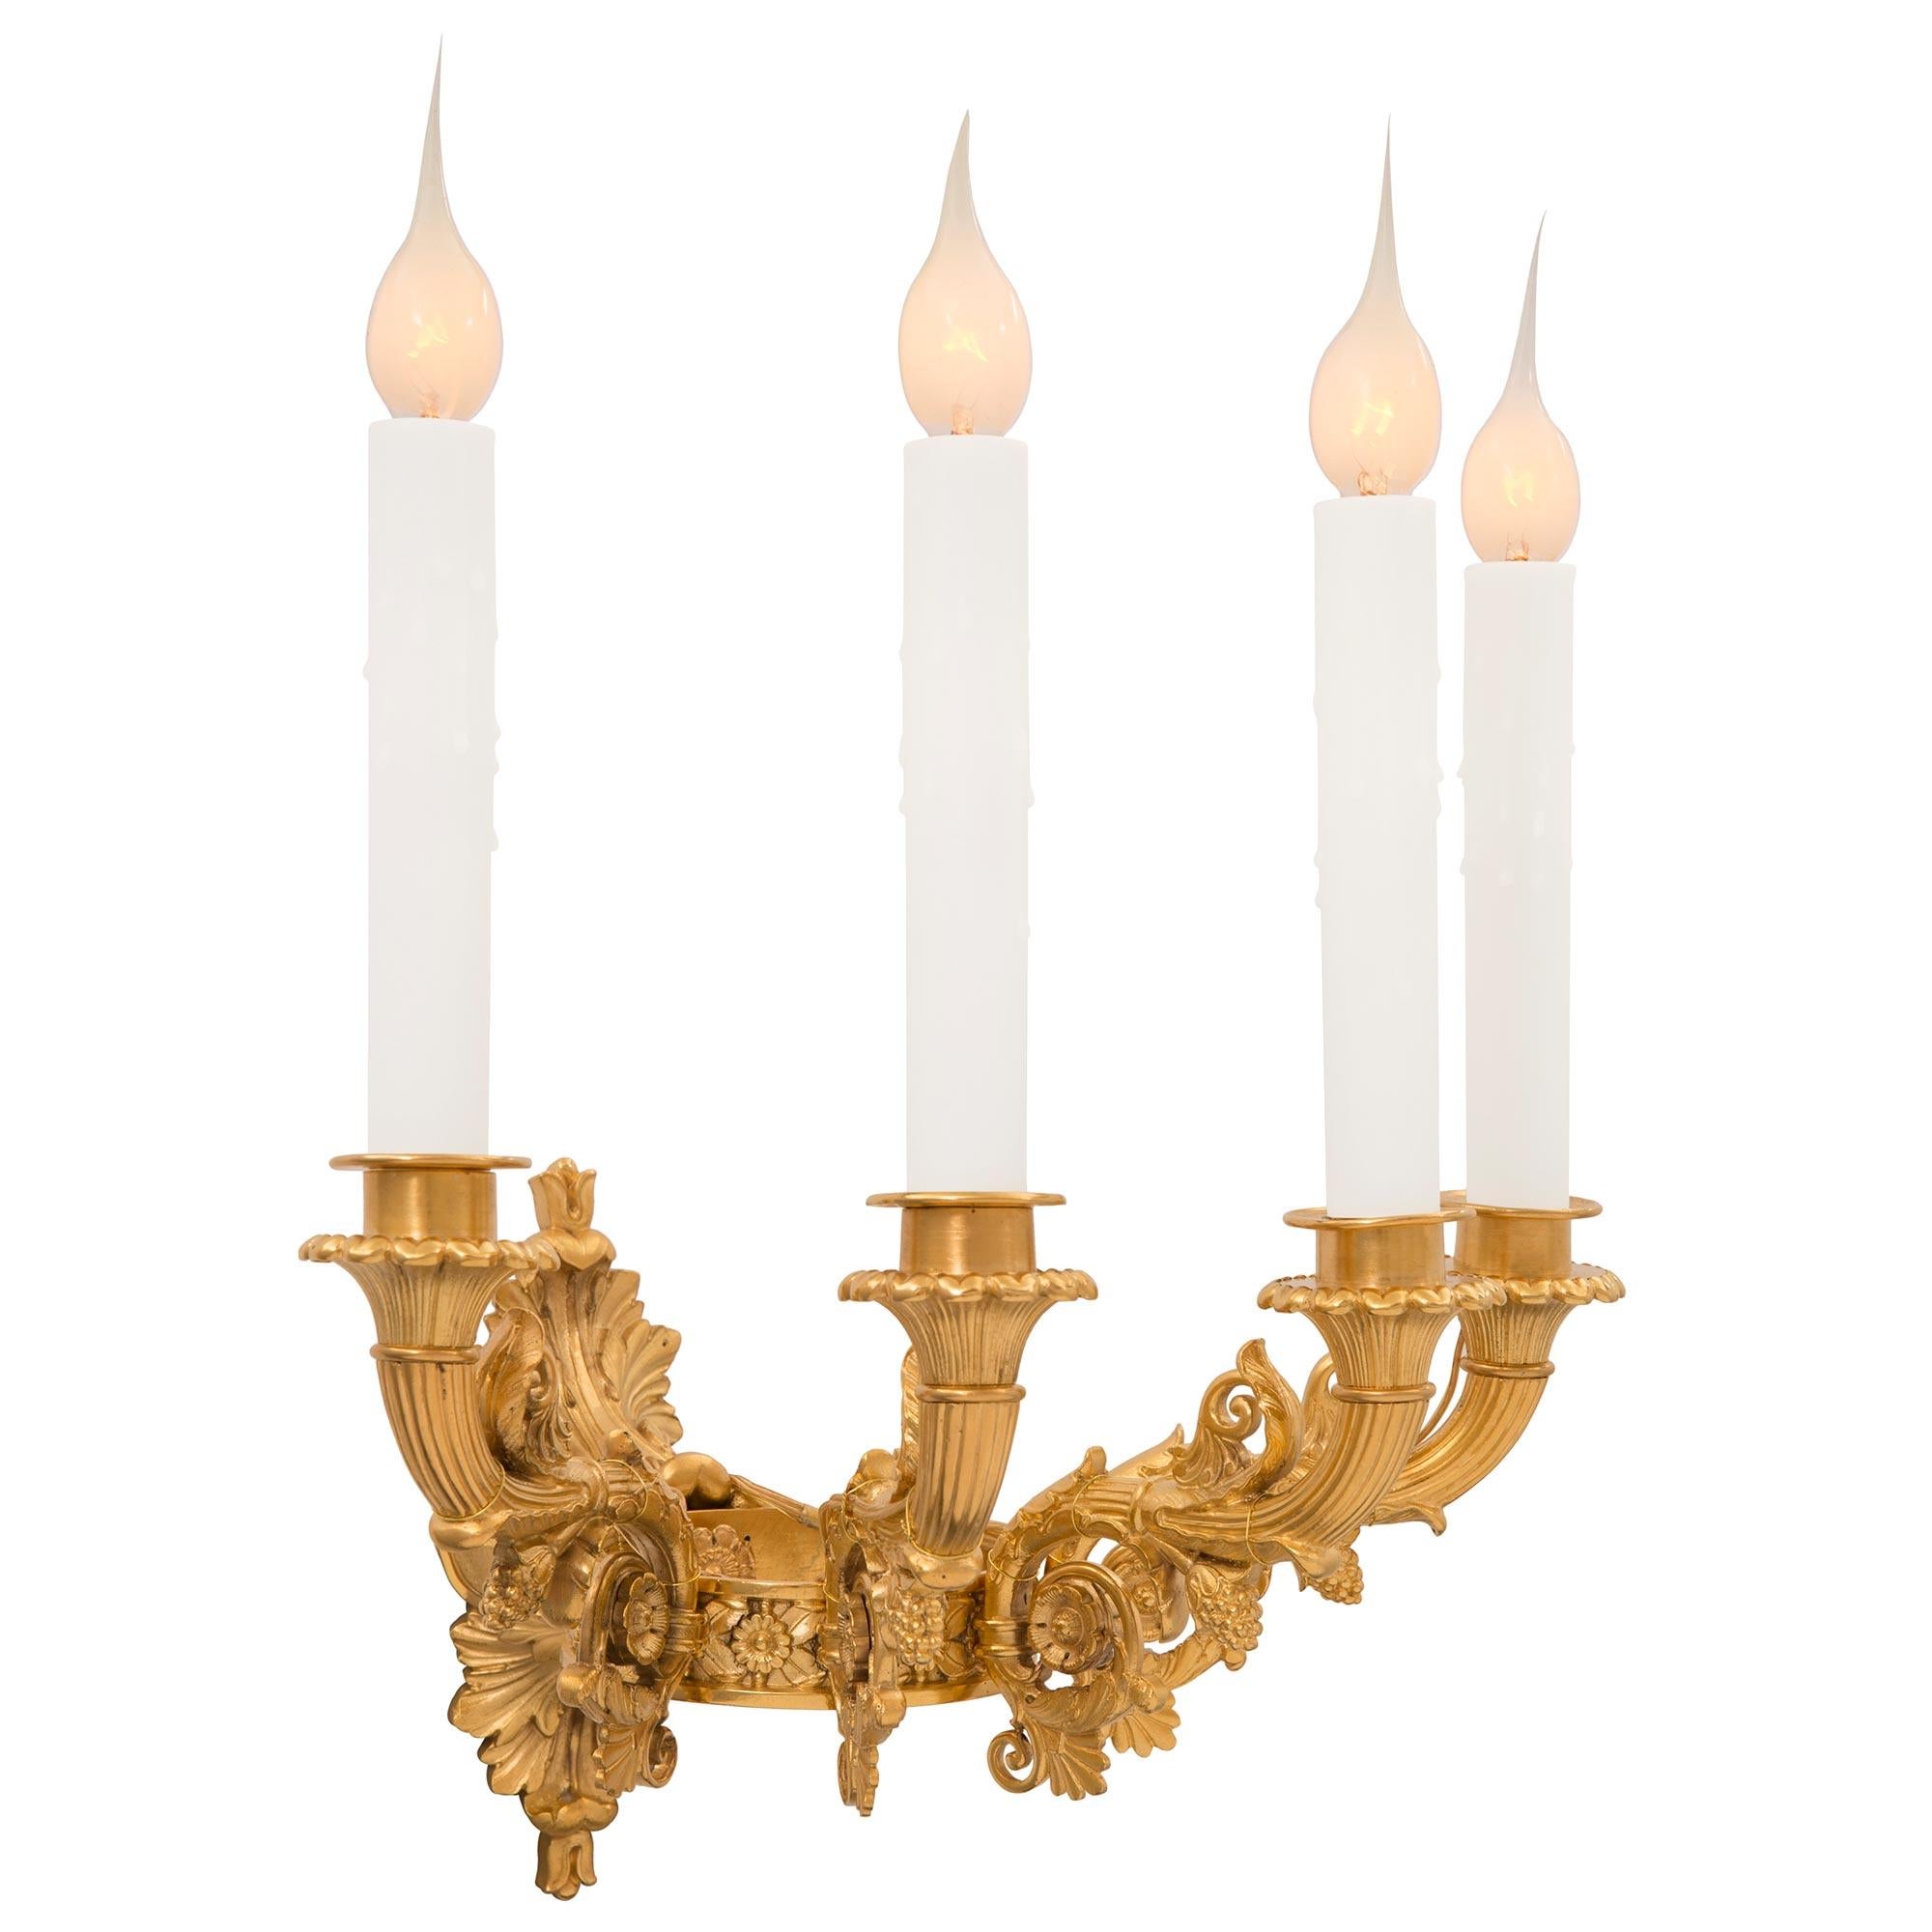 A stunning pair of French 19th century Charles X st. ormolu sconces. Each four arm sconce is centered by a beautiful richly chased palmette from where the arms branch out. Each elegantly scrolled arm branches out from a unique crown like ring and